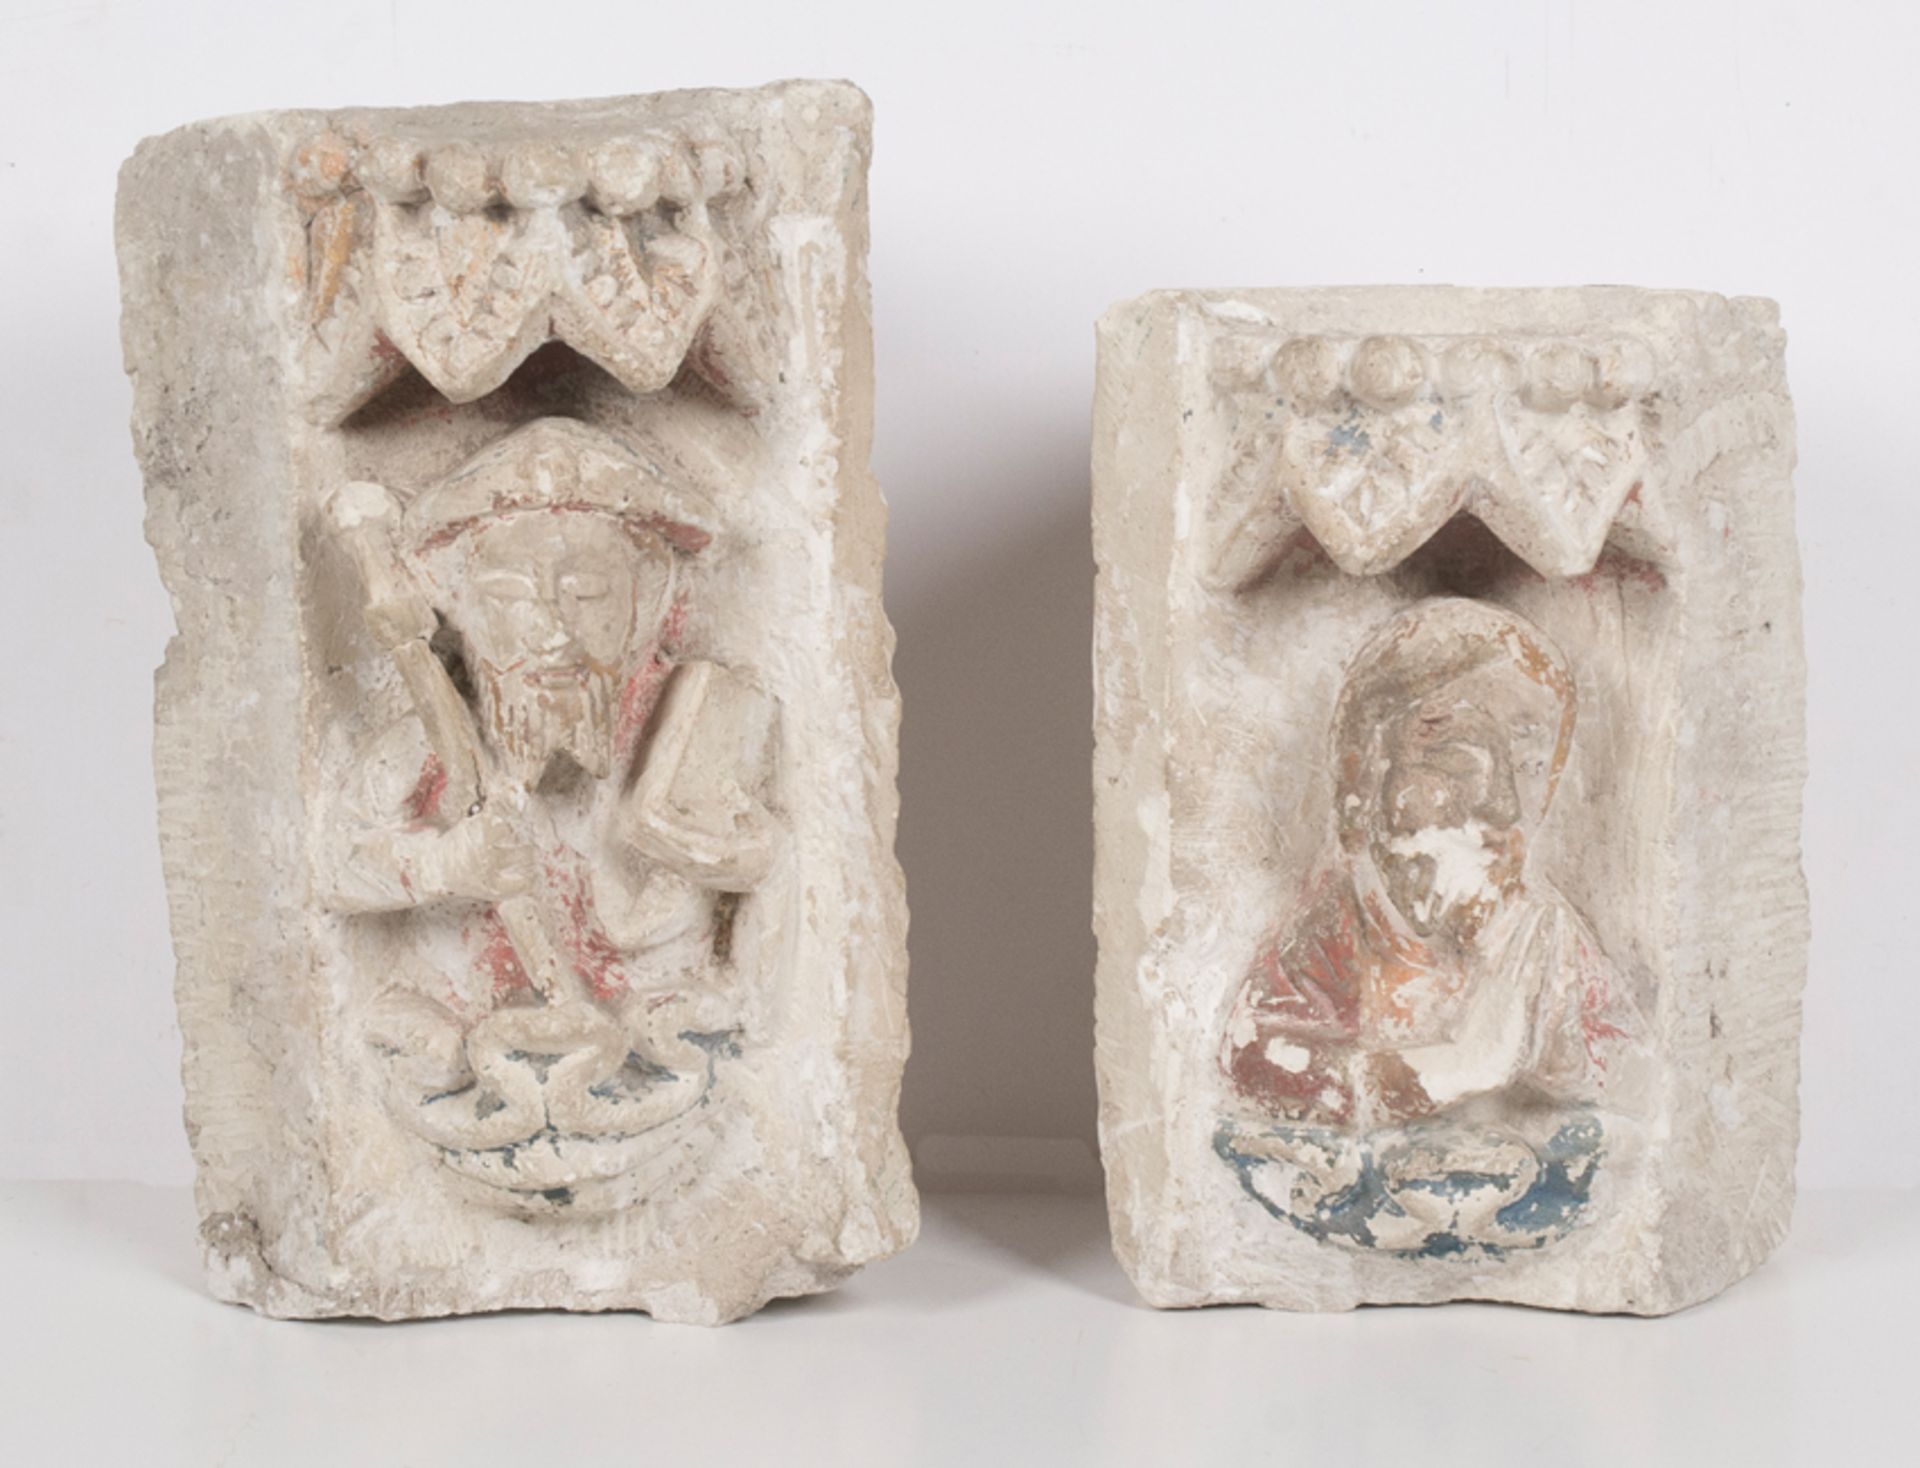 Set of for stone sculptures with polychrome residue. Romanesque. 13th century.